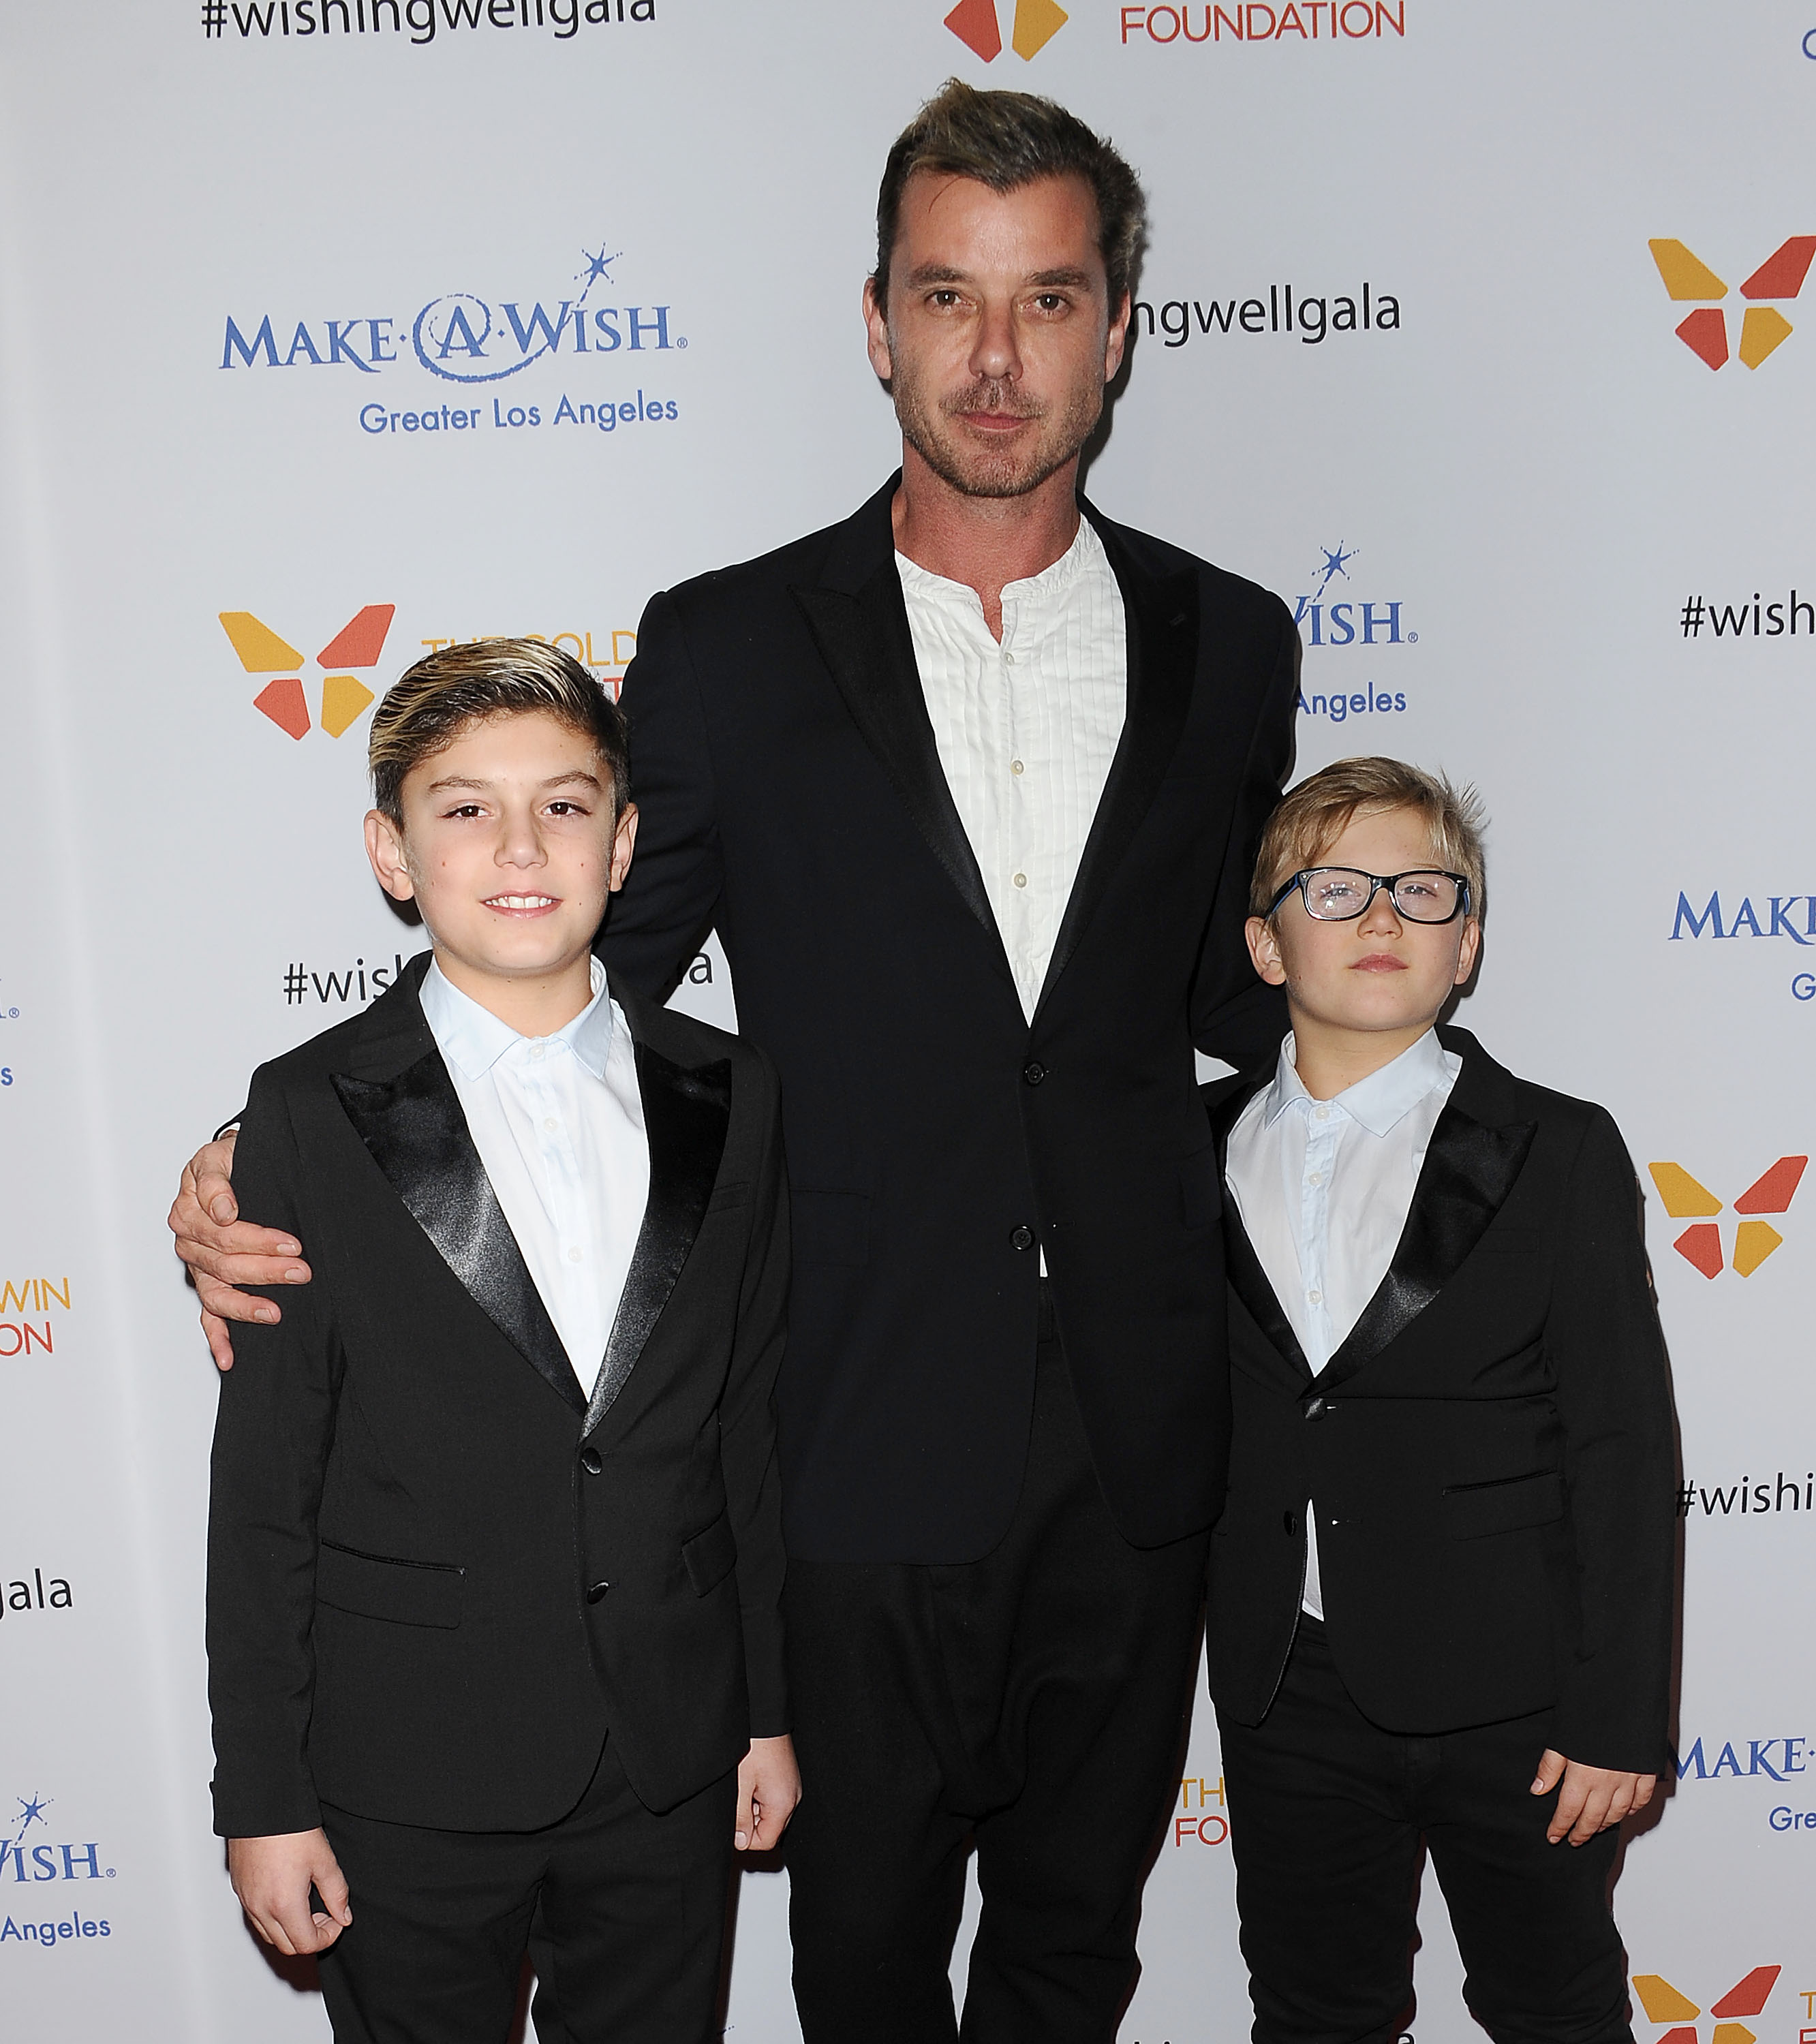 Kingston Rossdale, Gavin Rossdale and Zuma Rossdale, 2016 | Source: Getty Images